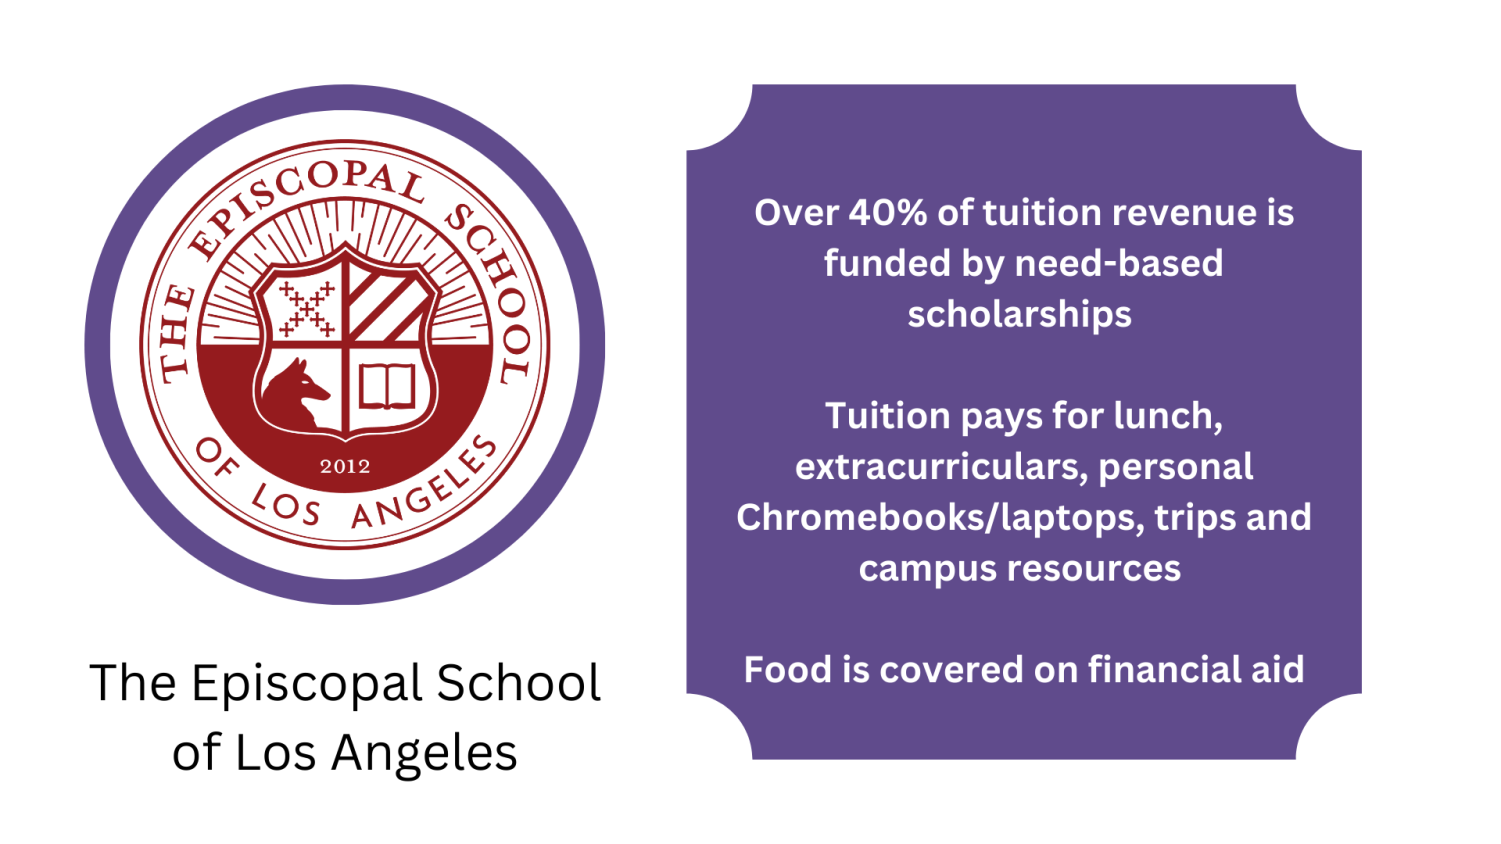 Students+raise+concerns+about+lack+of+food+stipends%2C+administration+shares+complexities+behind+schools+budgeting